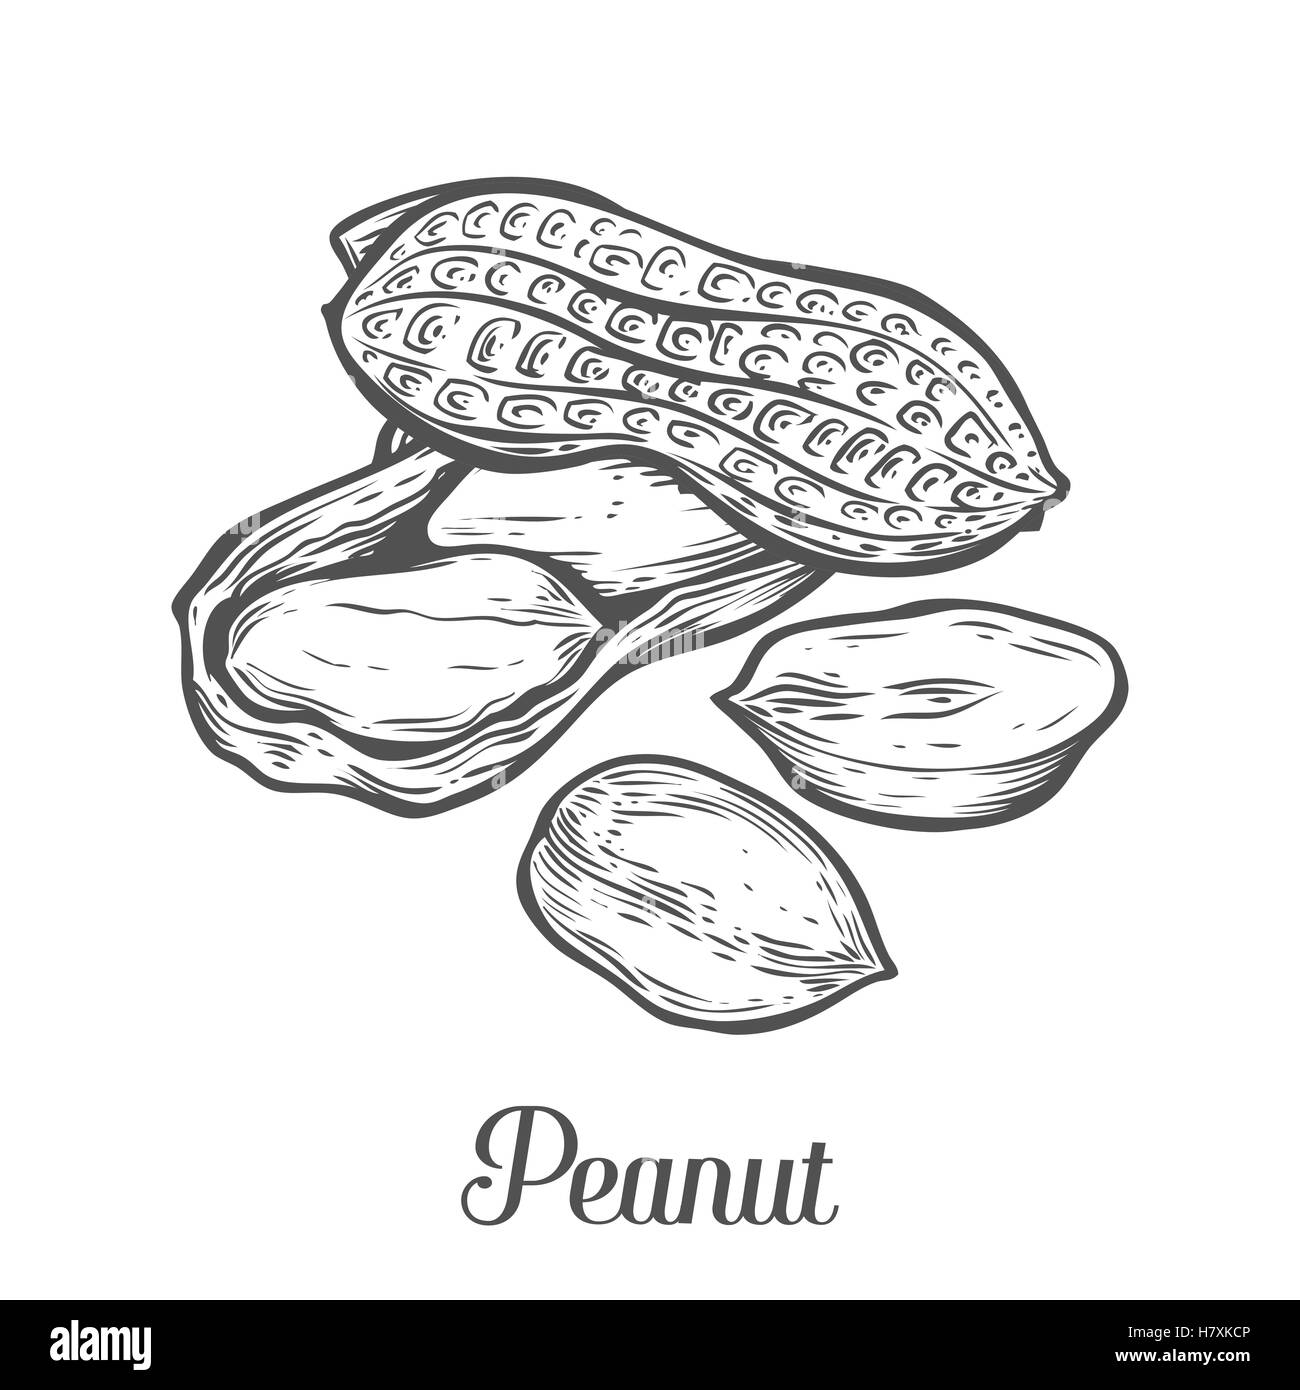 Peanut Butter Black And White Stock Photos & Images - Alamy